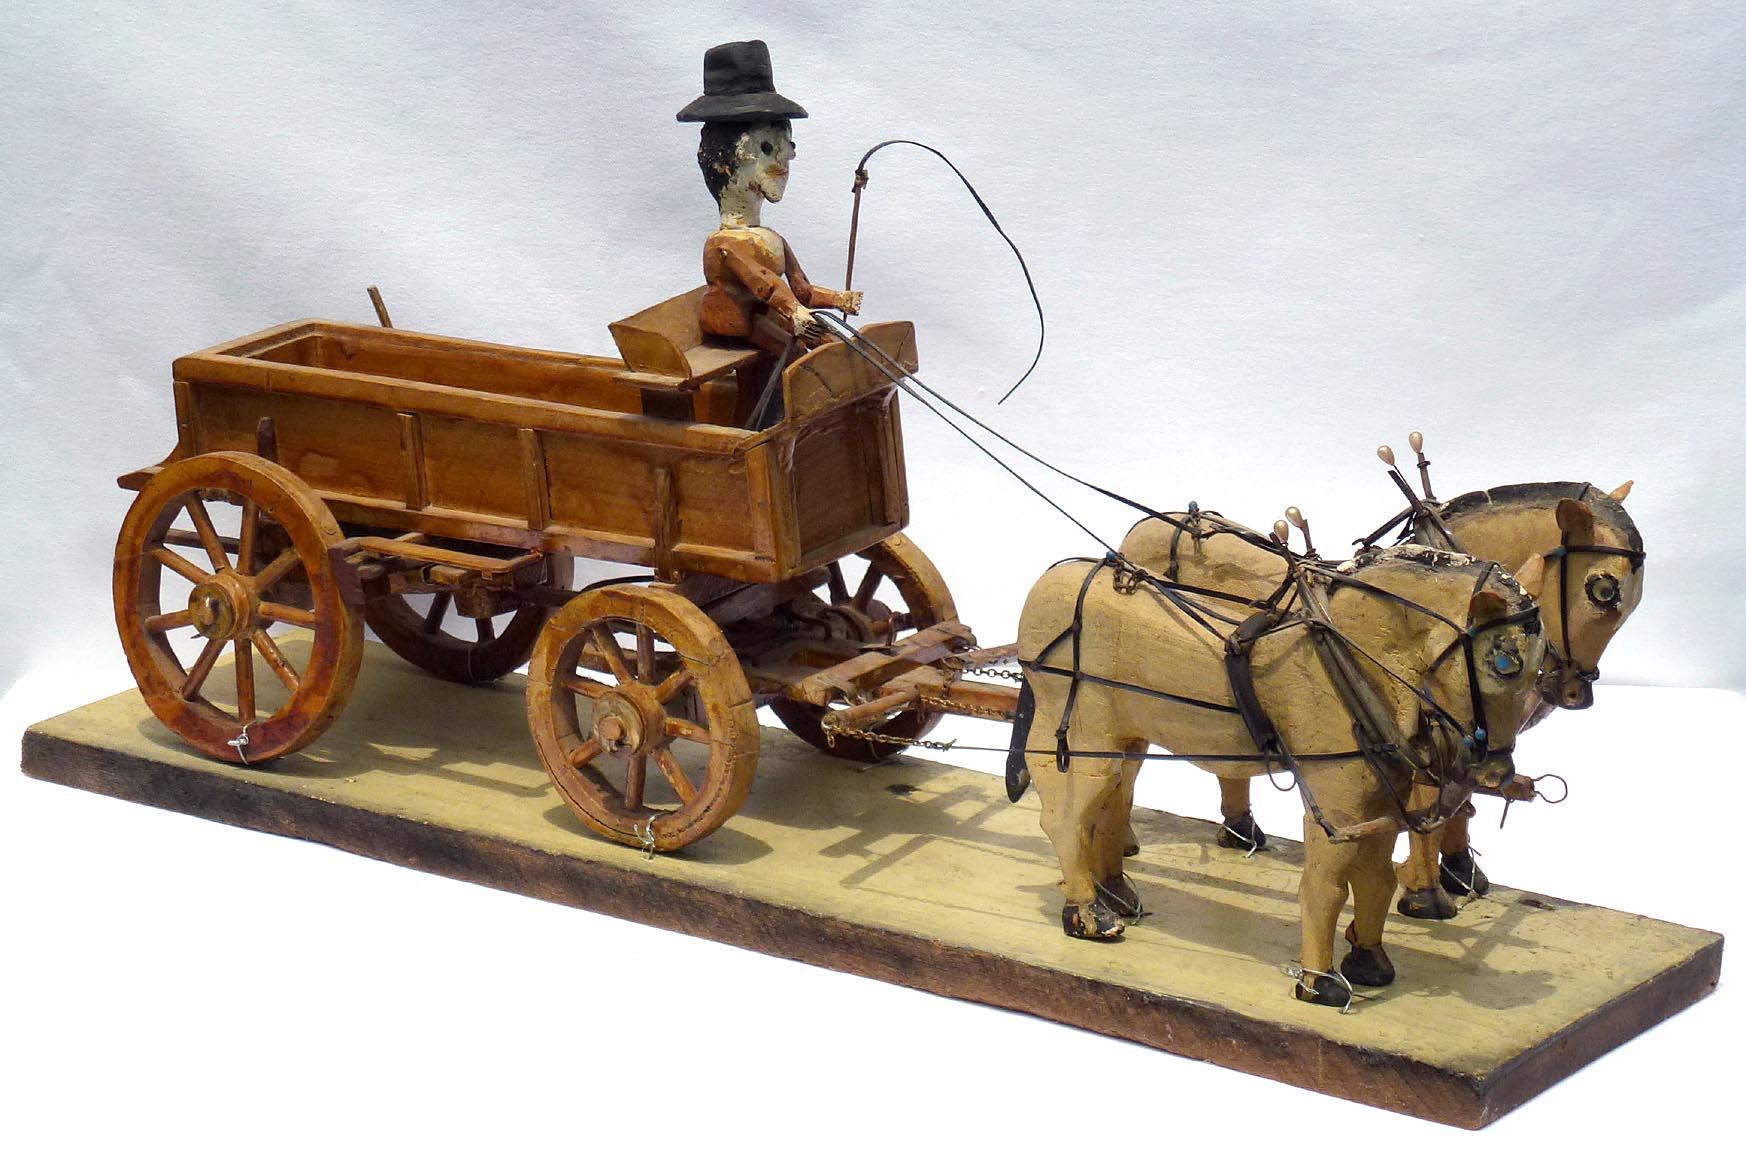 Carved man, horses, and wagon